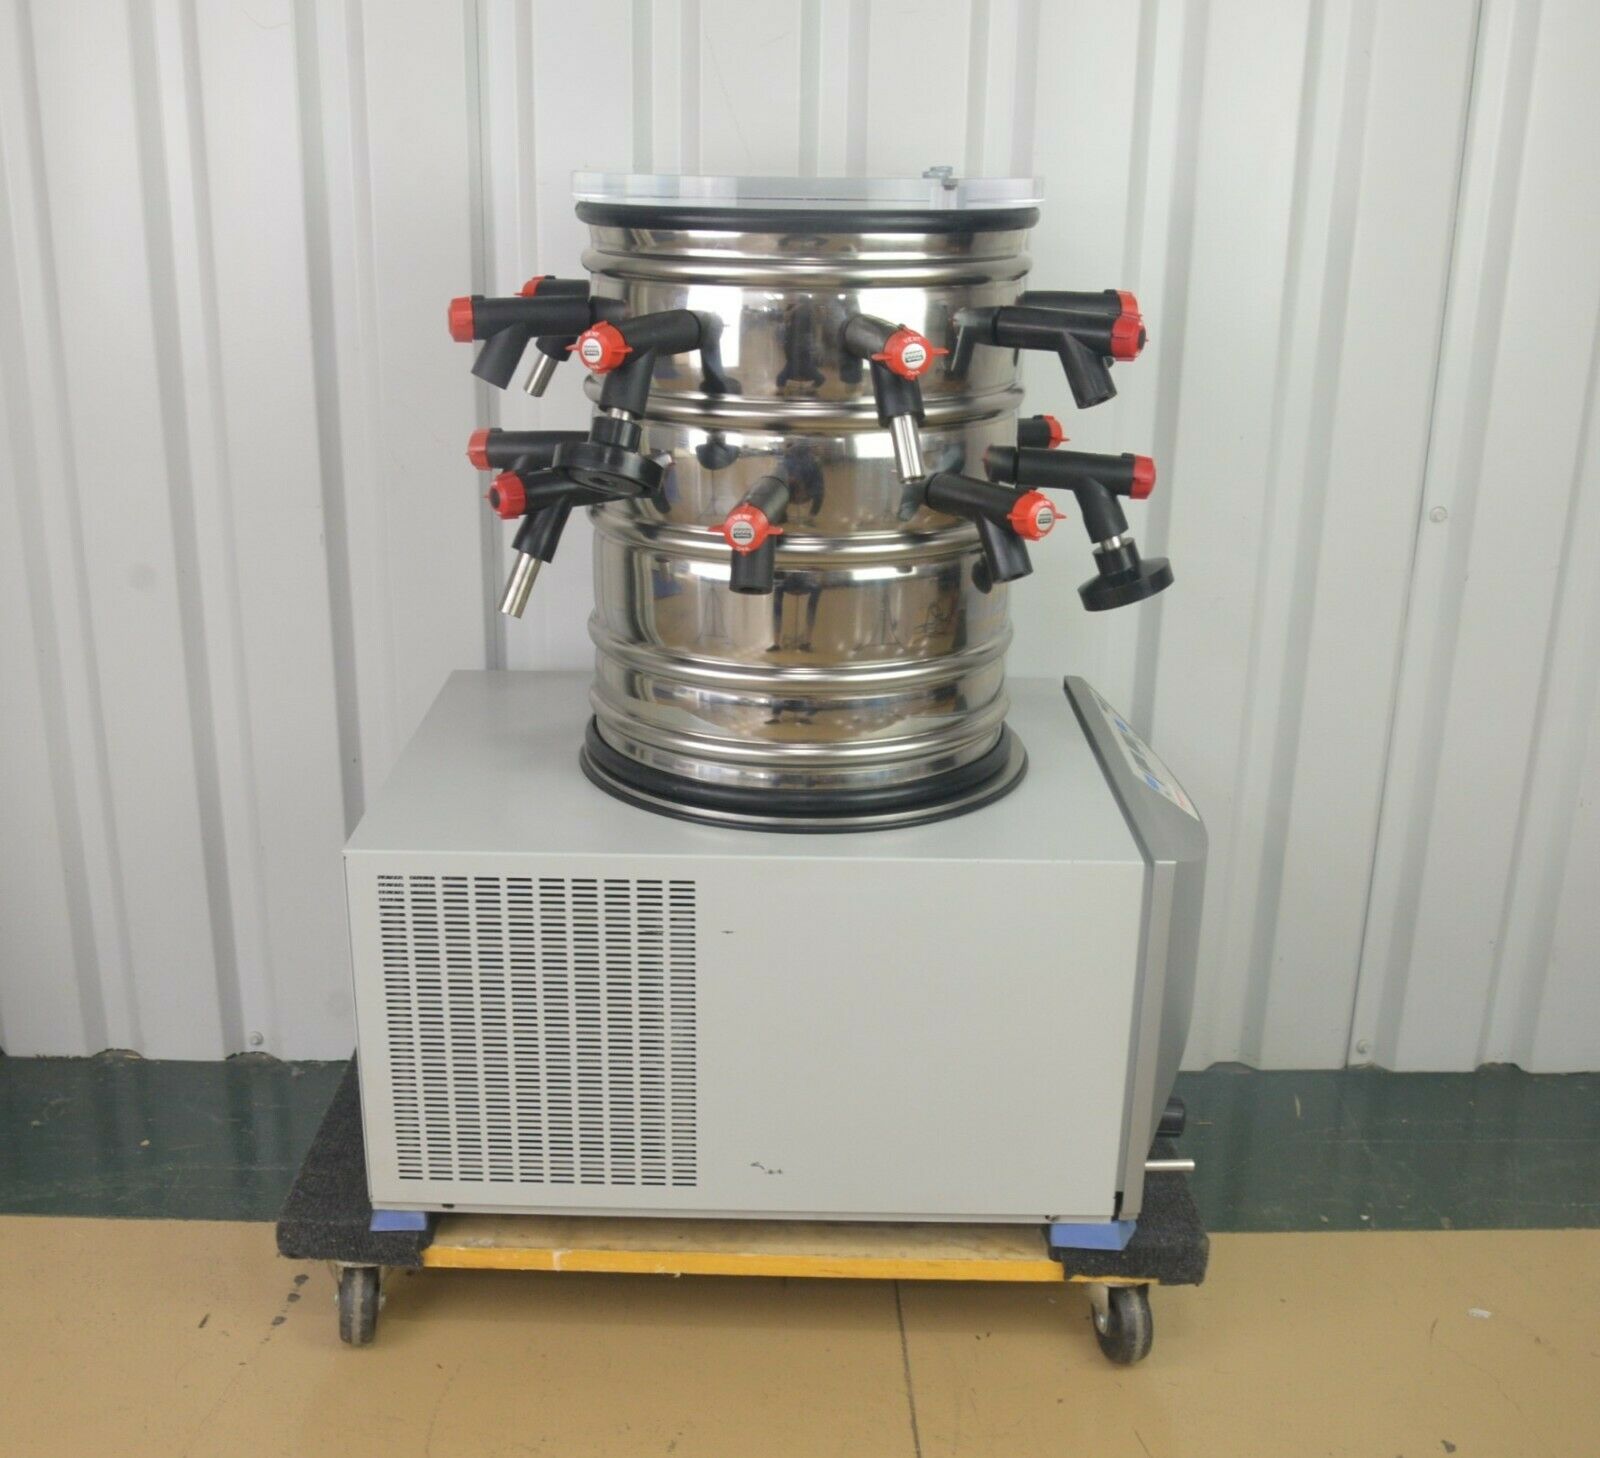 freeze drying systems